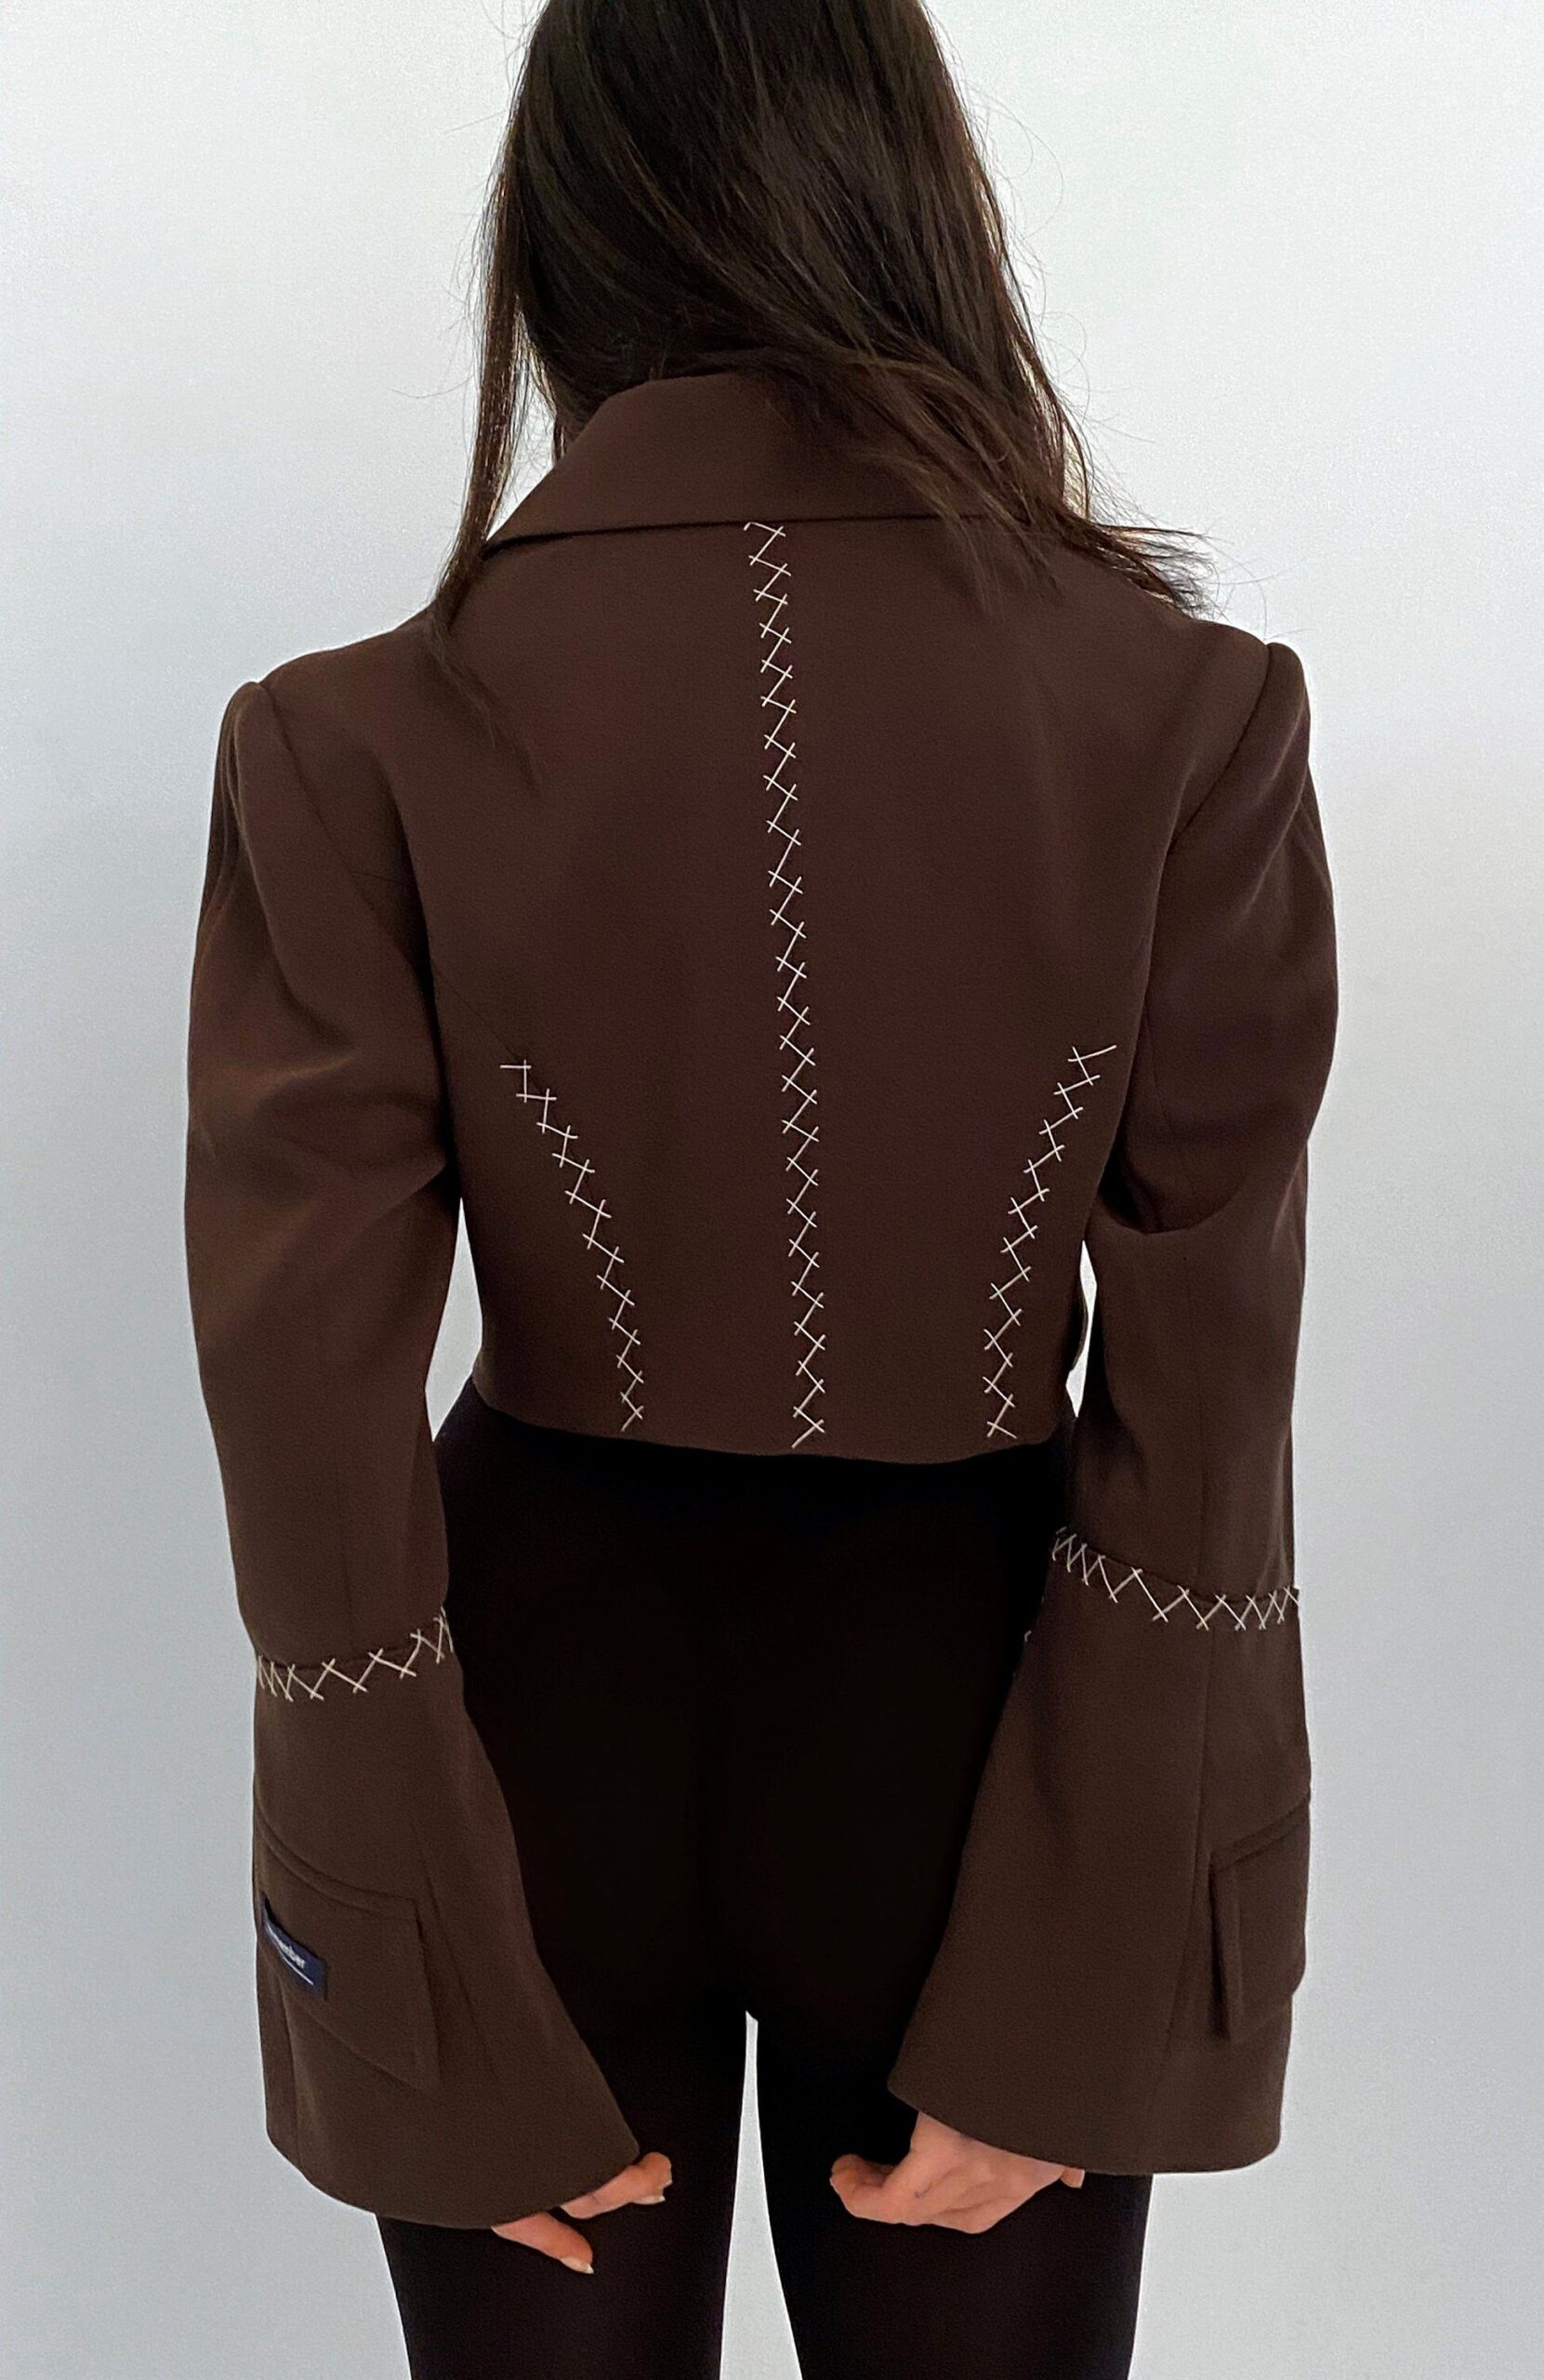 Sophisticated Layers: Elevate Your Look with Brown Blazers